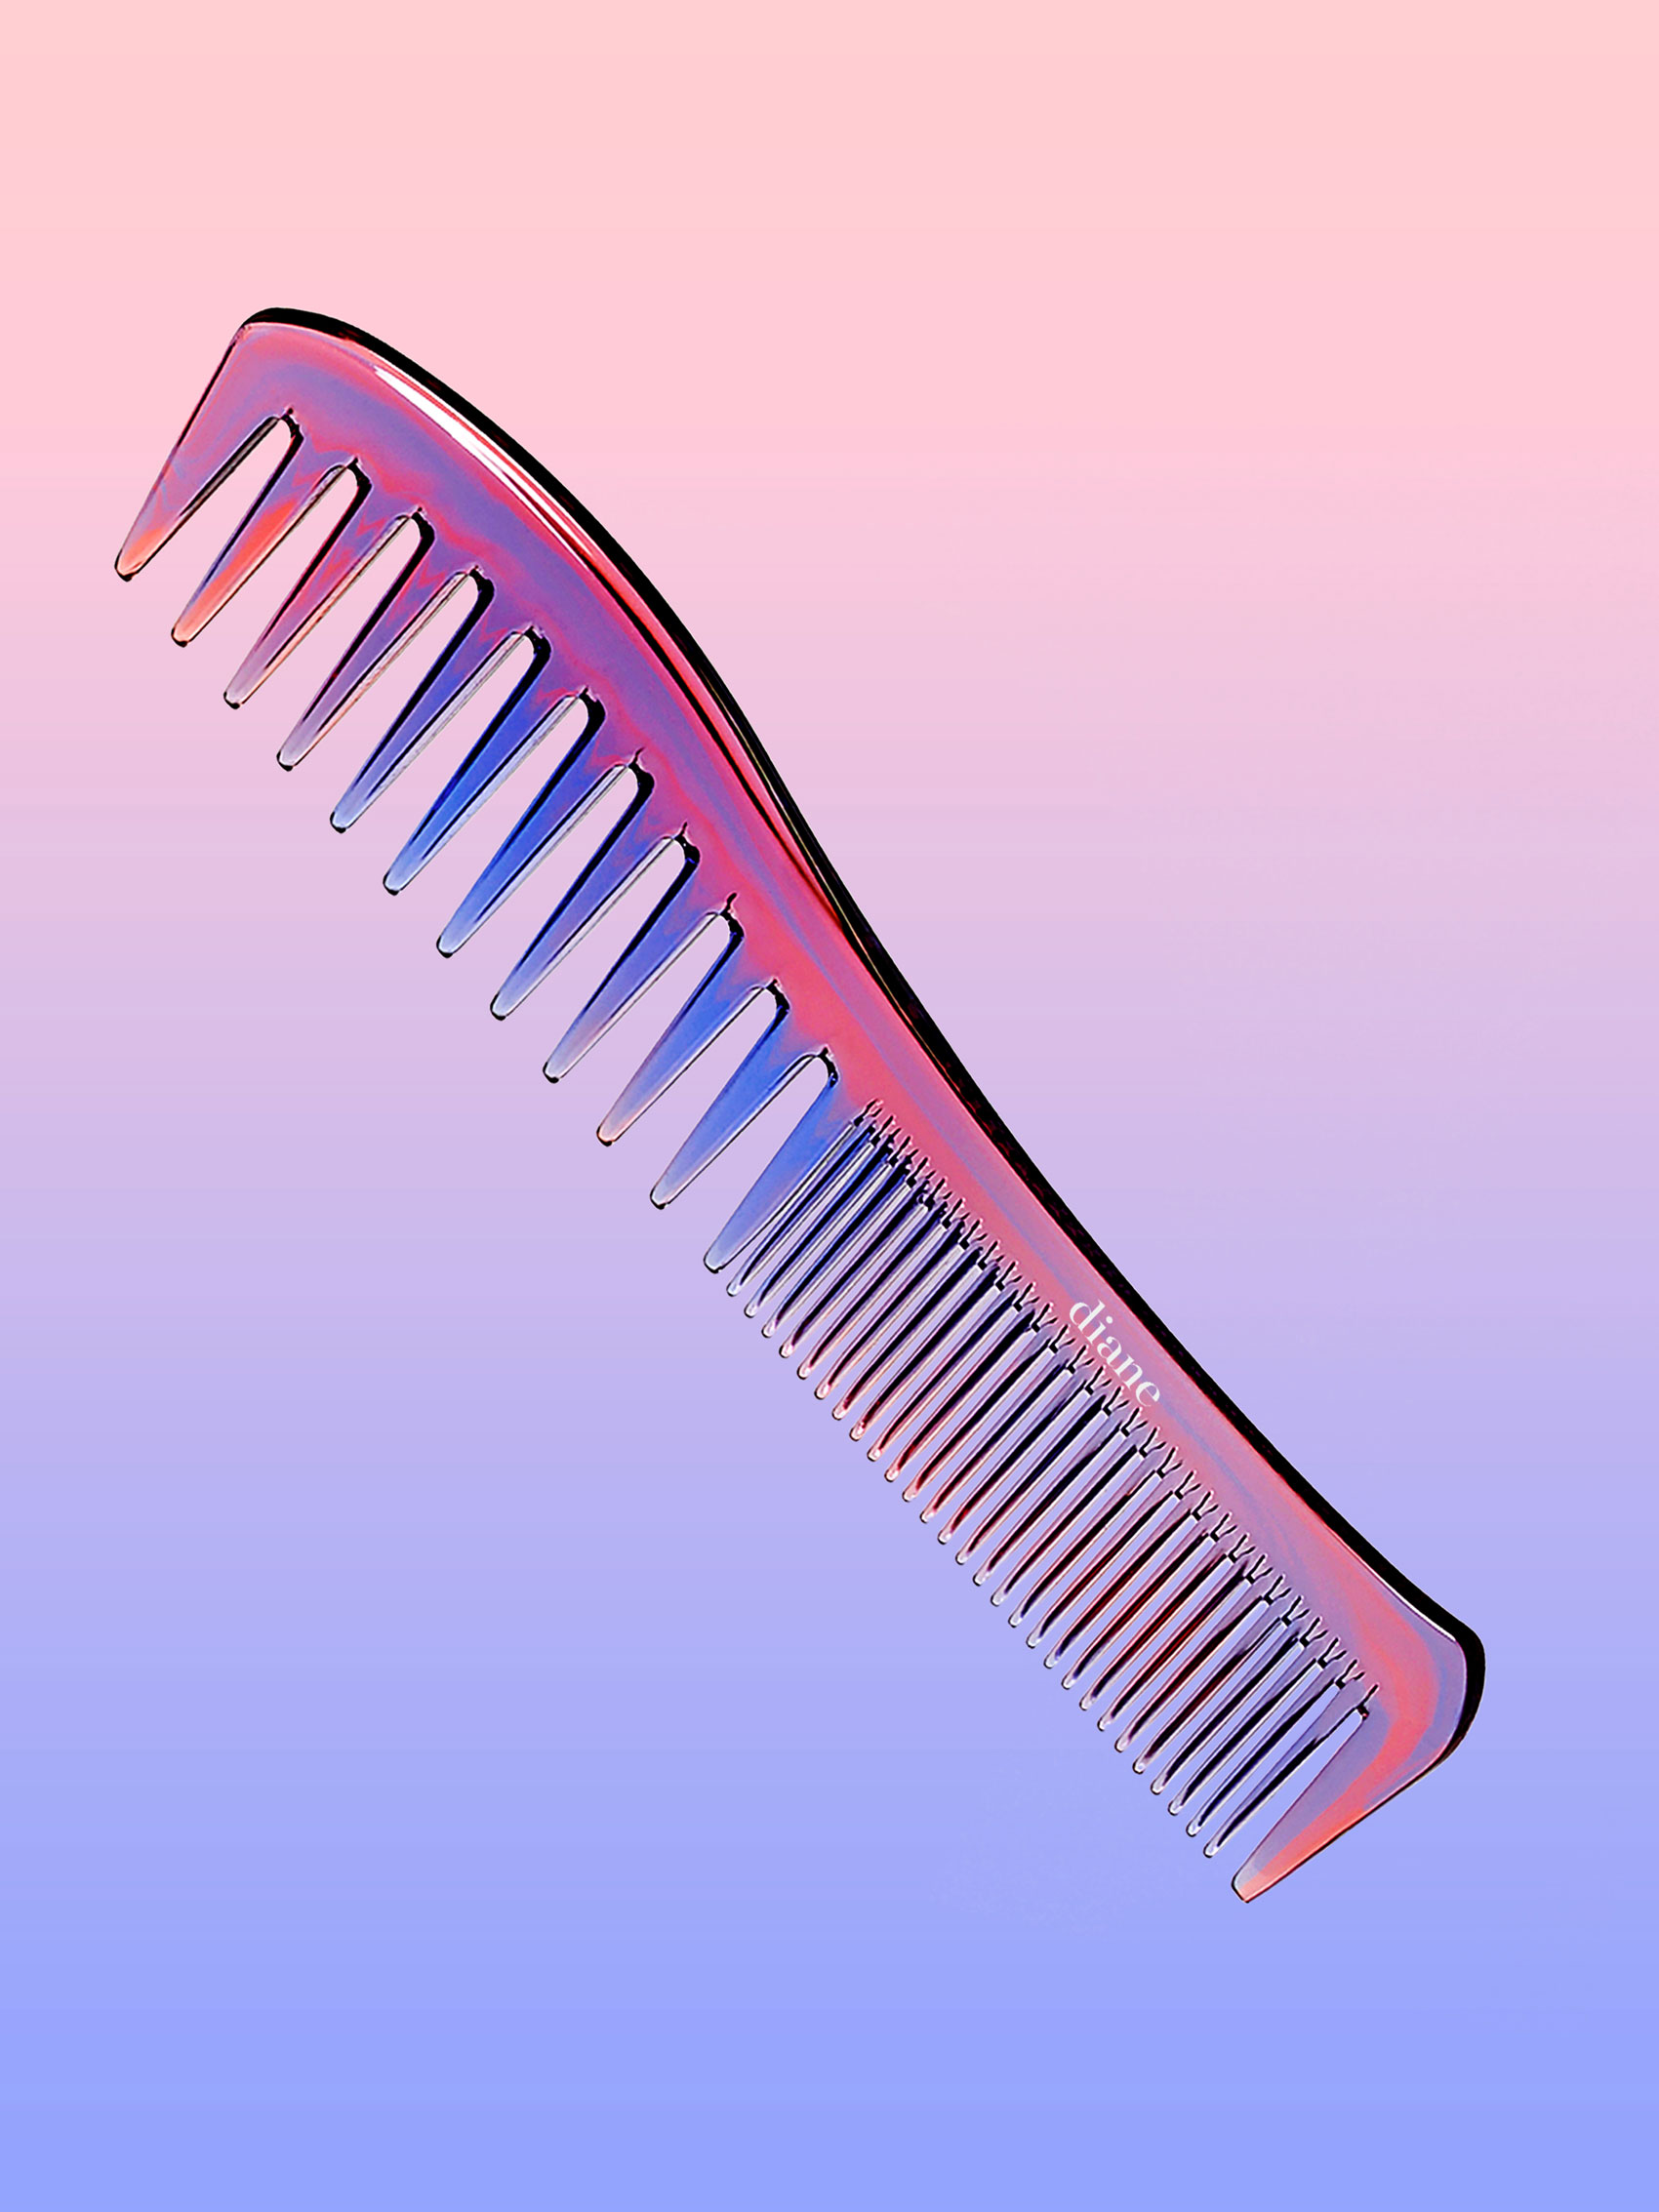 Comb suspended in air on pink and purple gradient